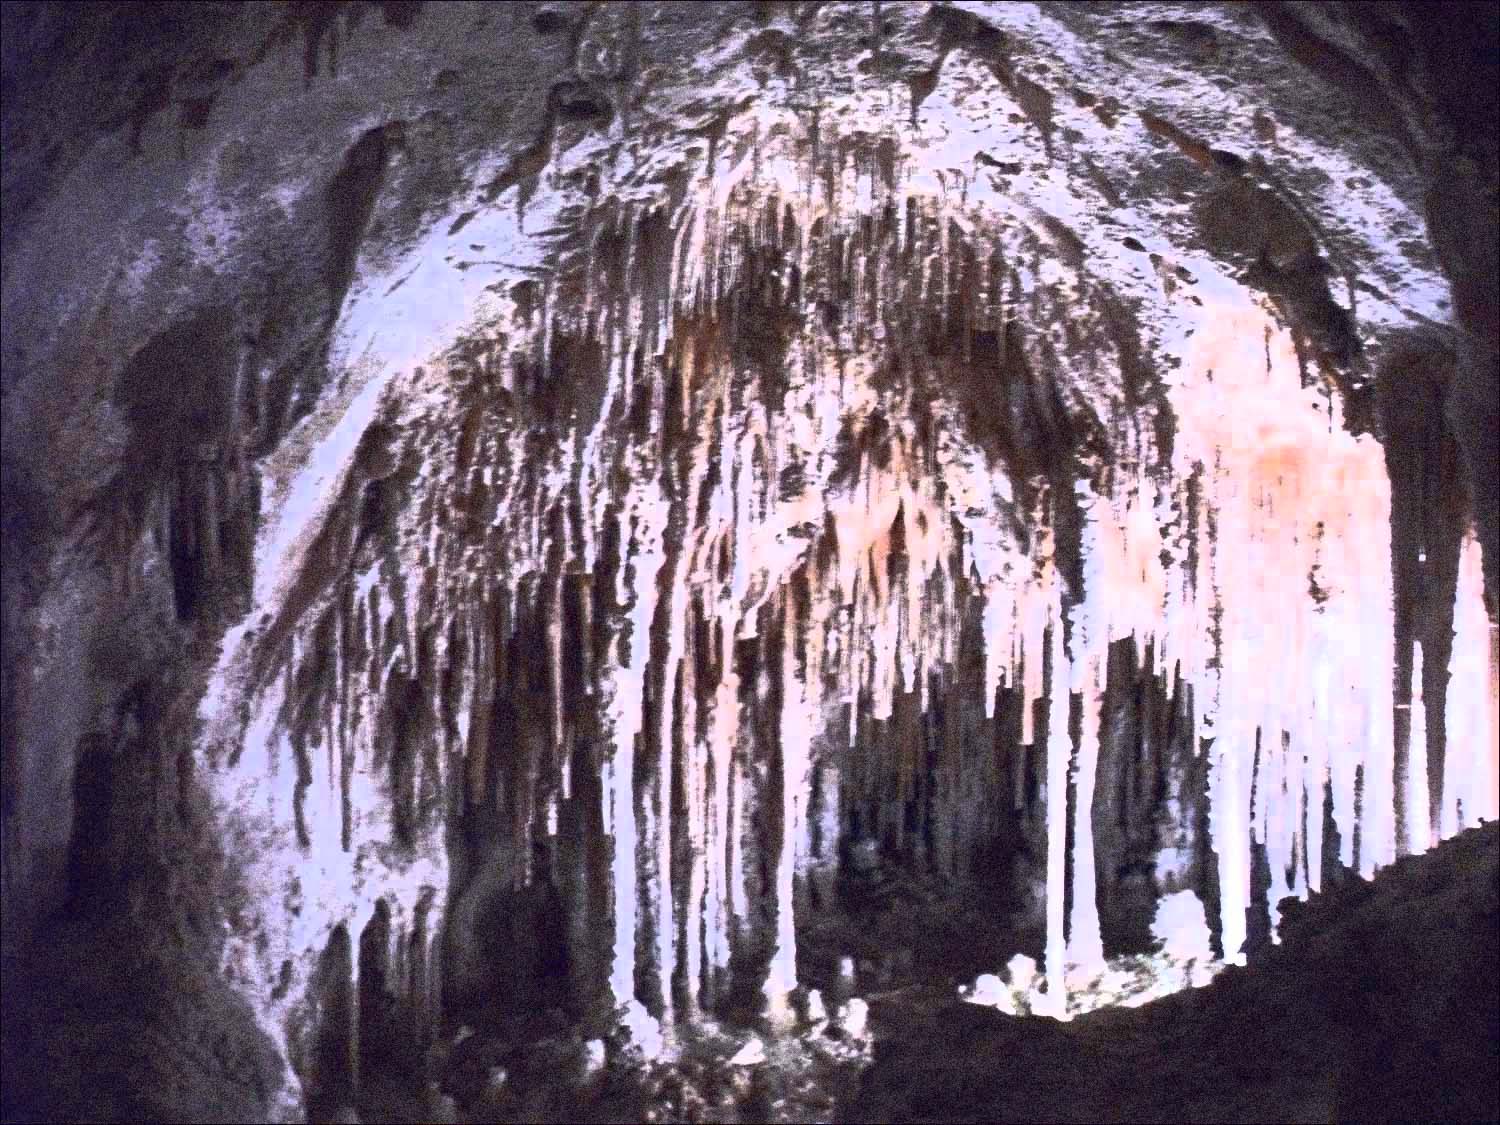 Carlsbad Caverns, NM-miniature cave, about 5 ft high